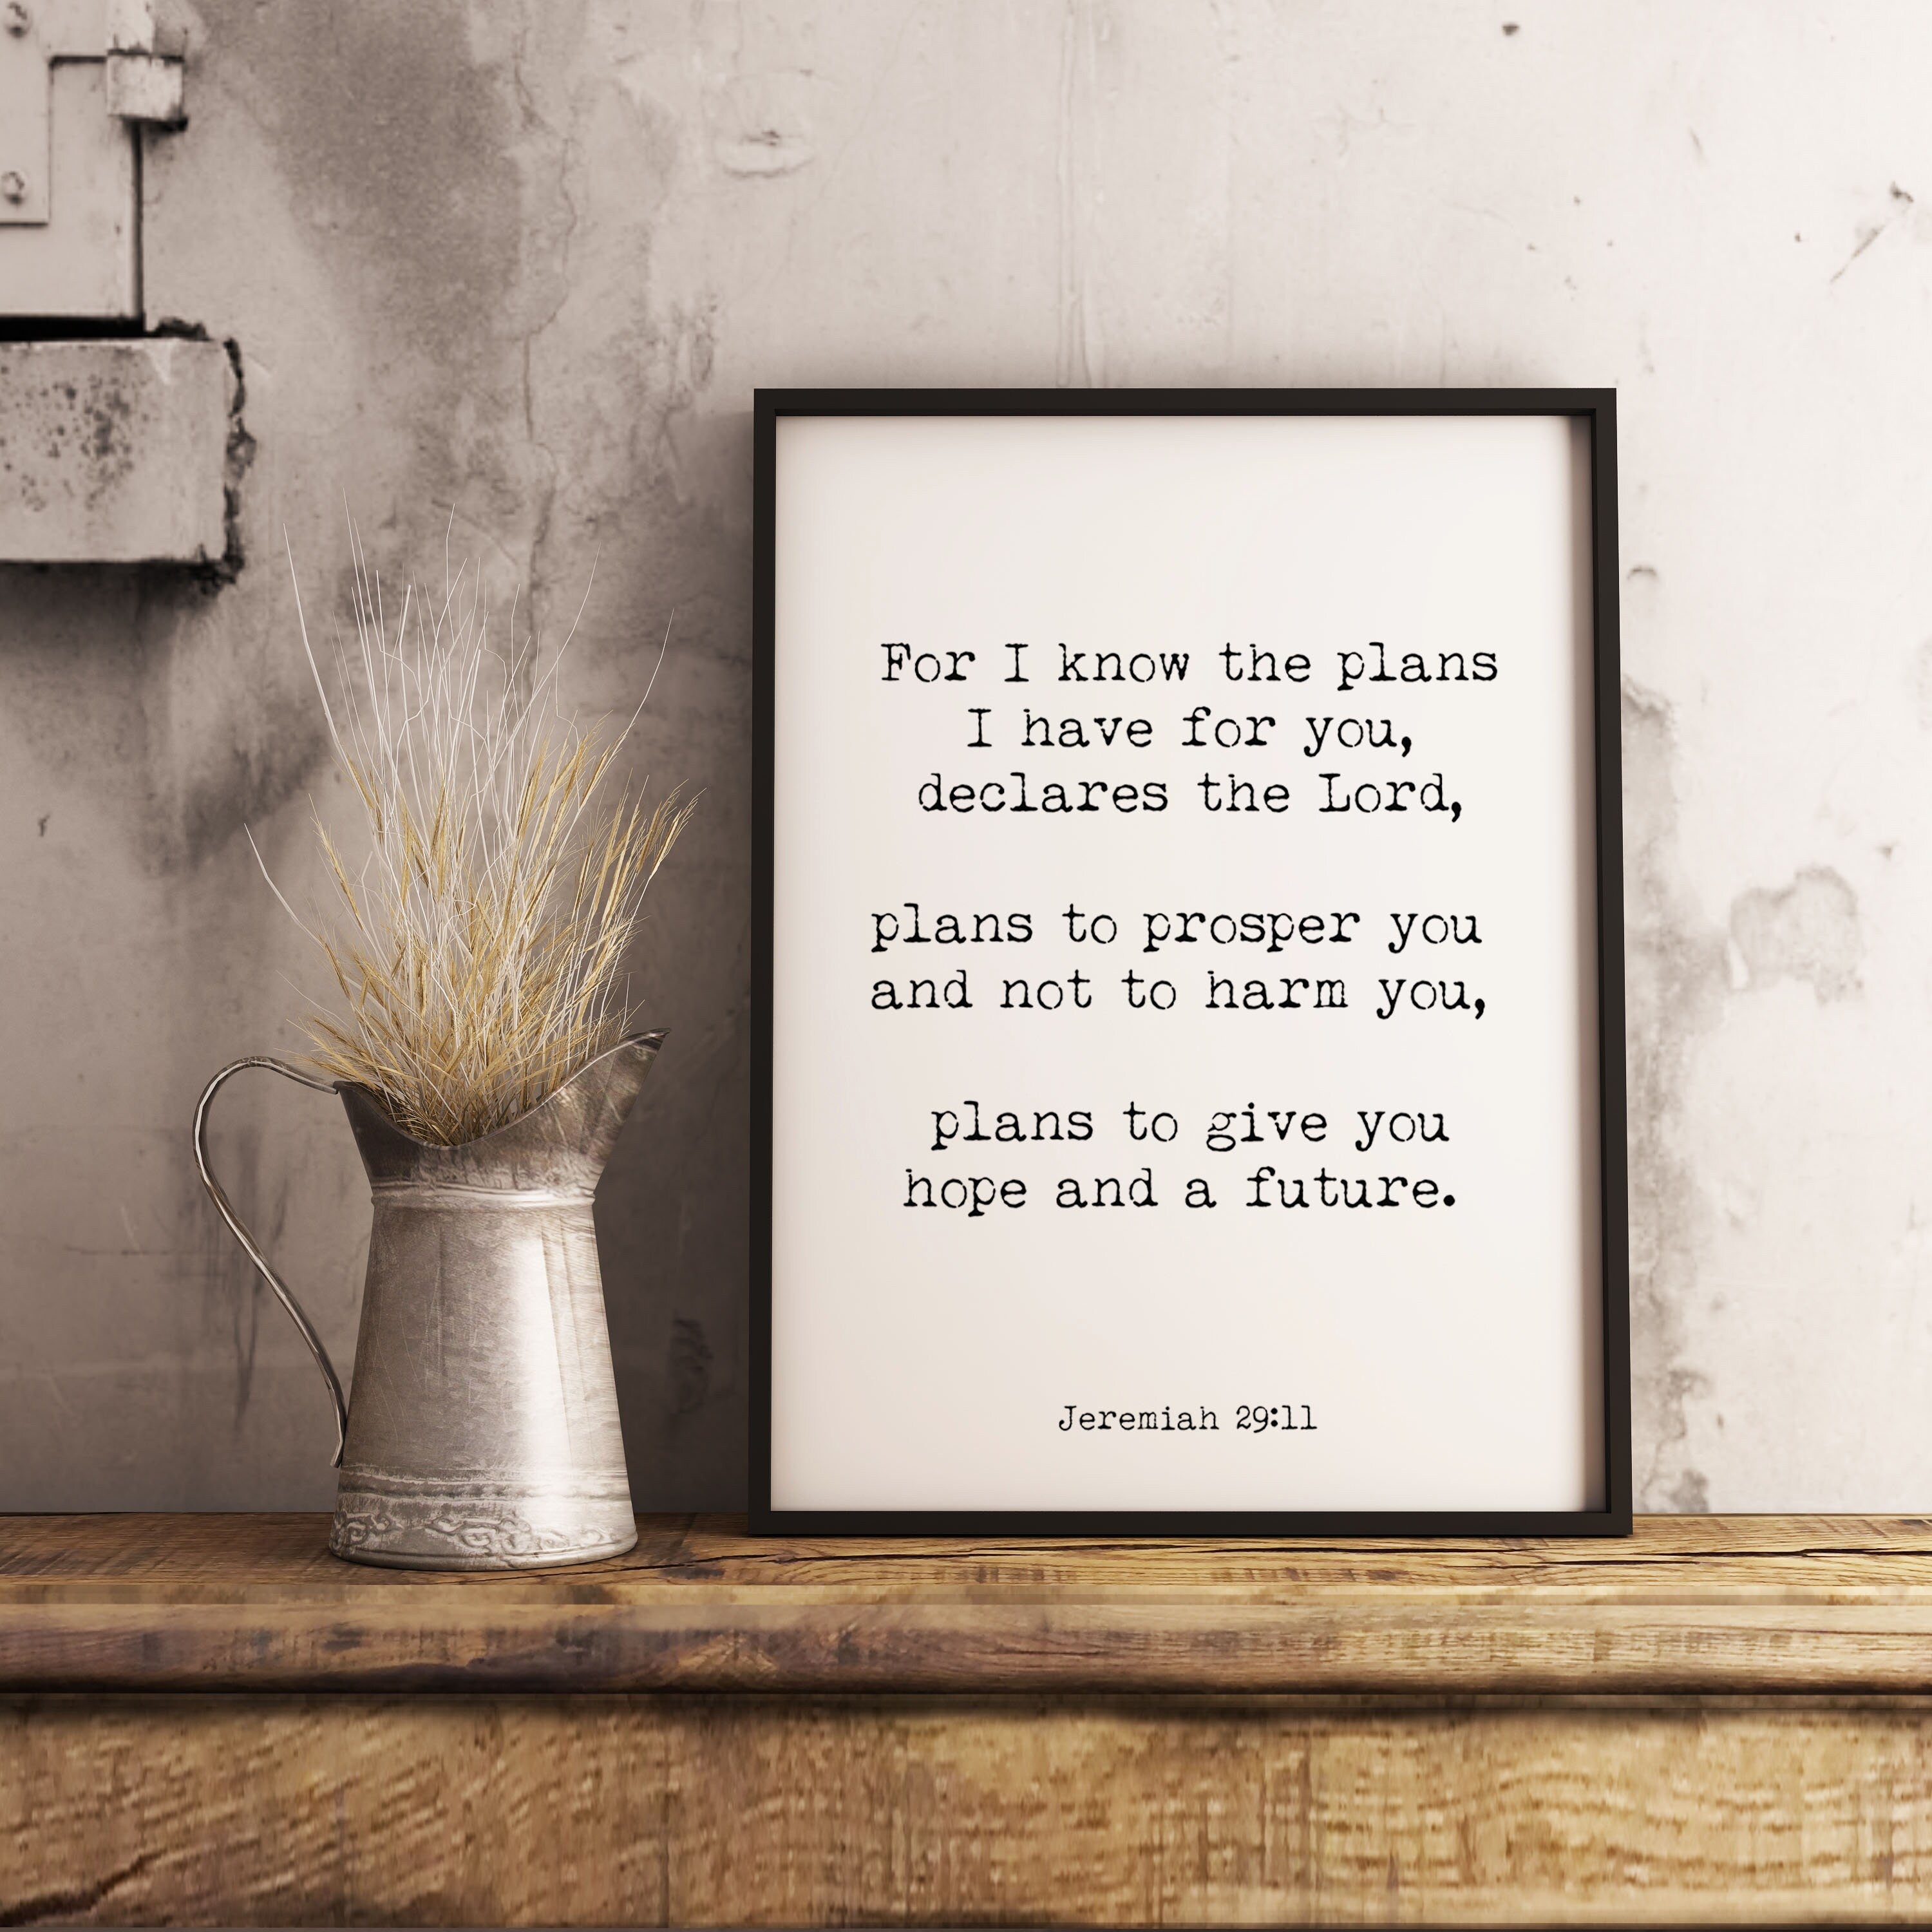 Give you Hope and a Future Jeremiah 29:11 Bible Verse Print, Inspirational Gift Wall Art in Black & White